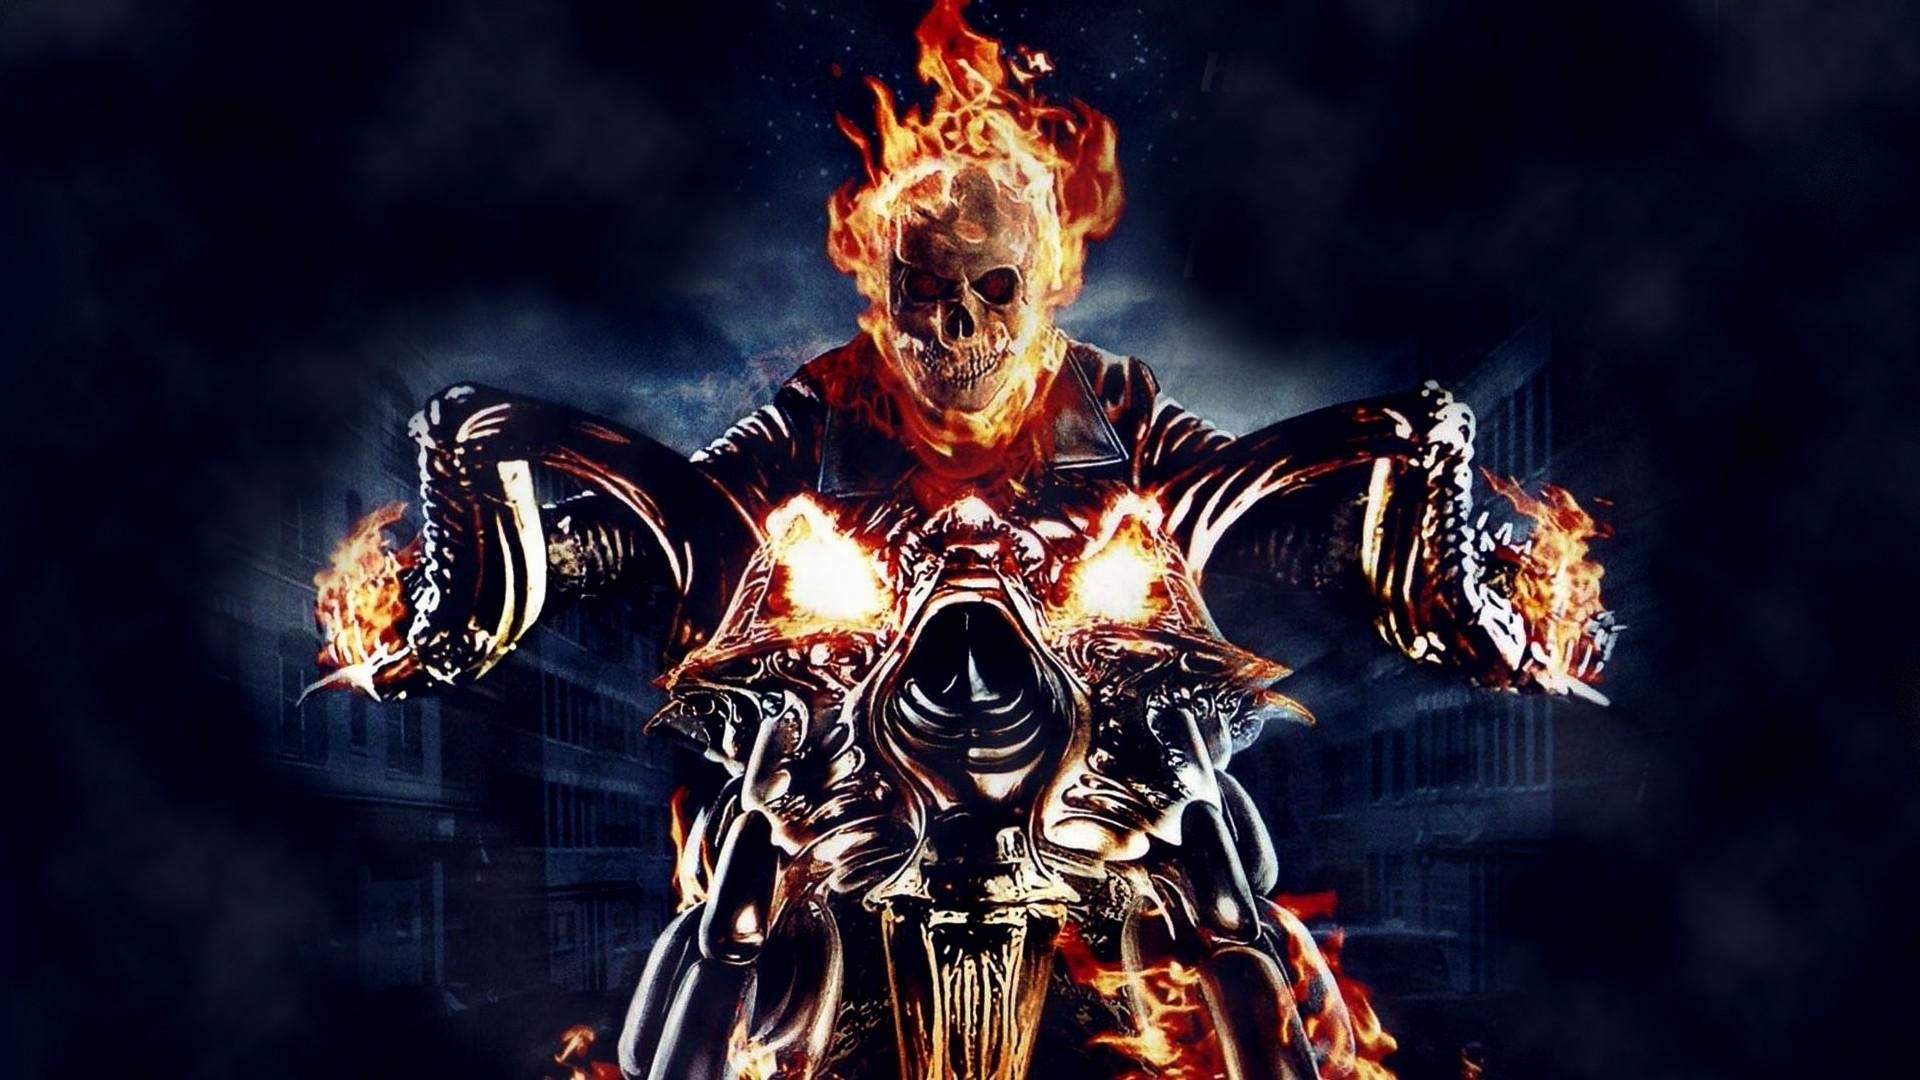 1920x1080 Download--Ghost-rider-Motorcycle-Fire-Skull-wallpaper-